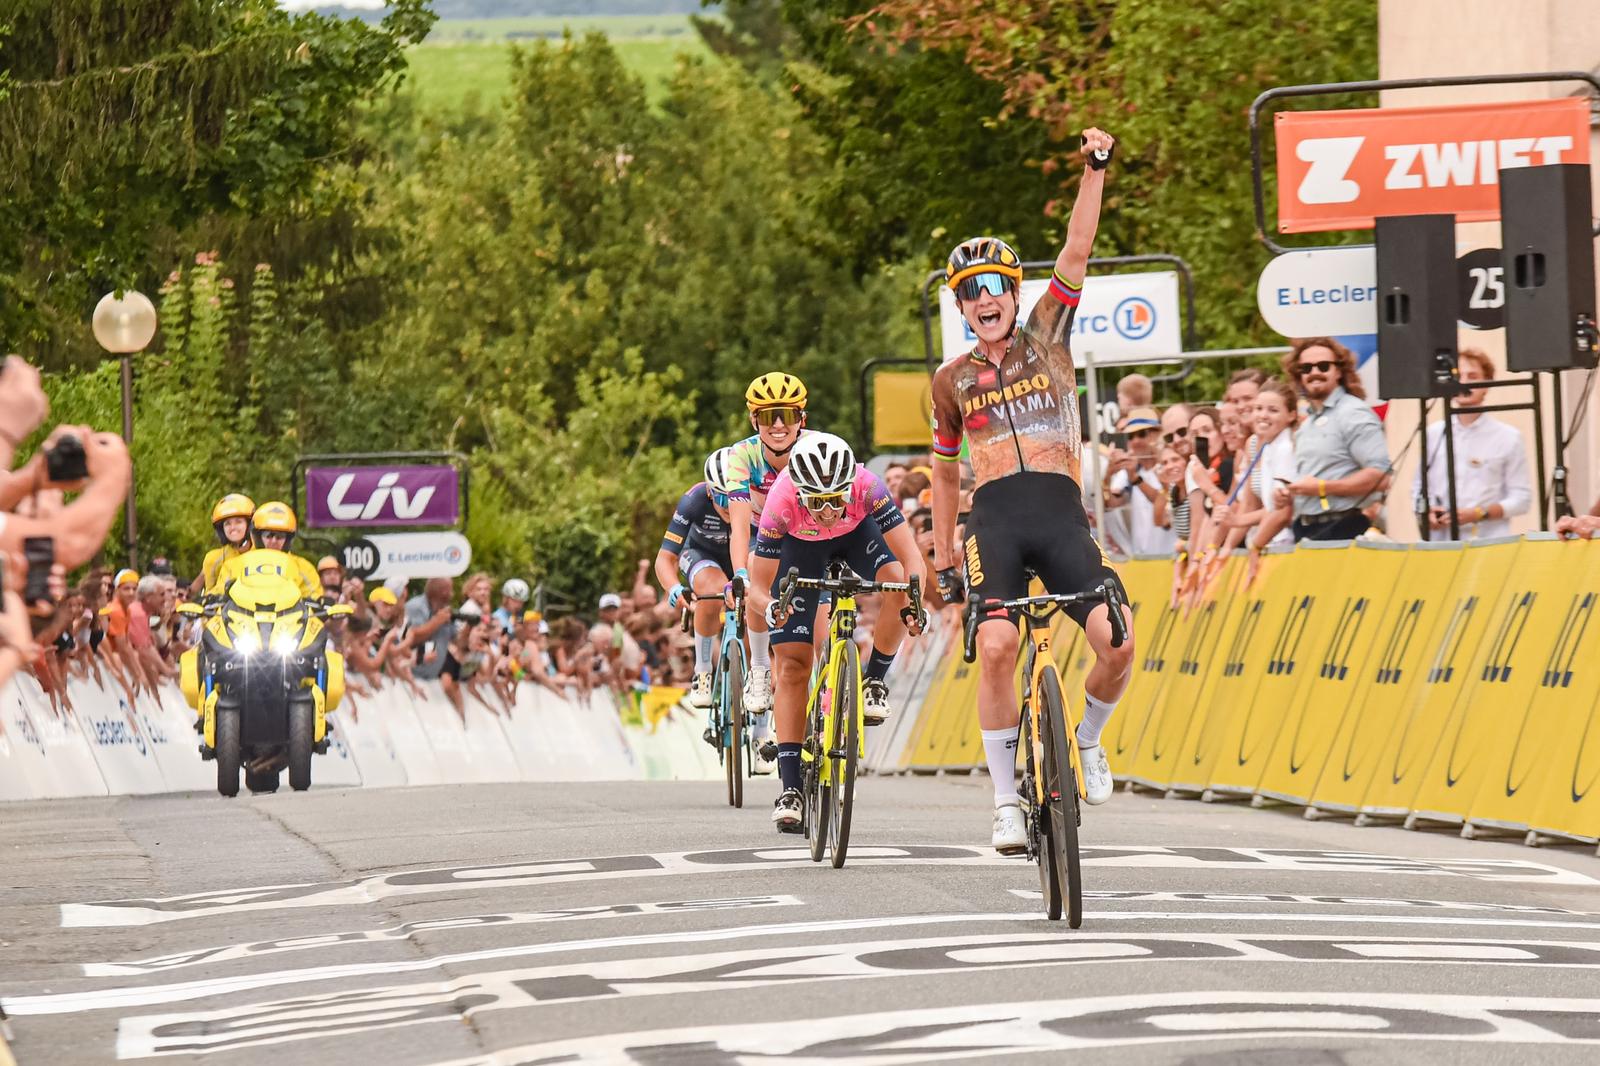 Silvia Persico celebrates her birthday with second place in the Tour de France Femmes